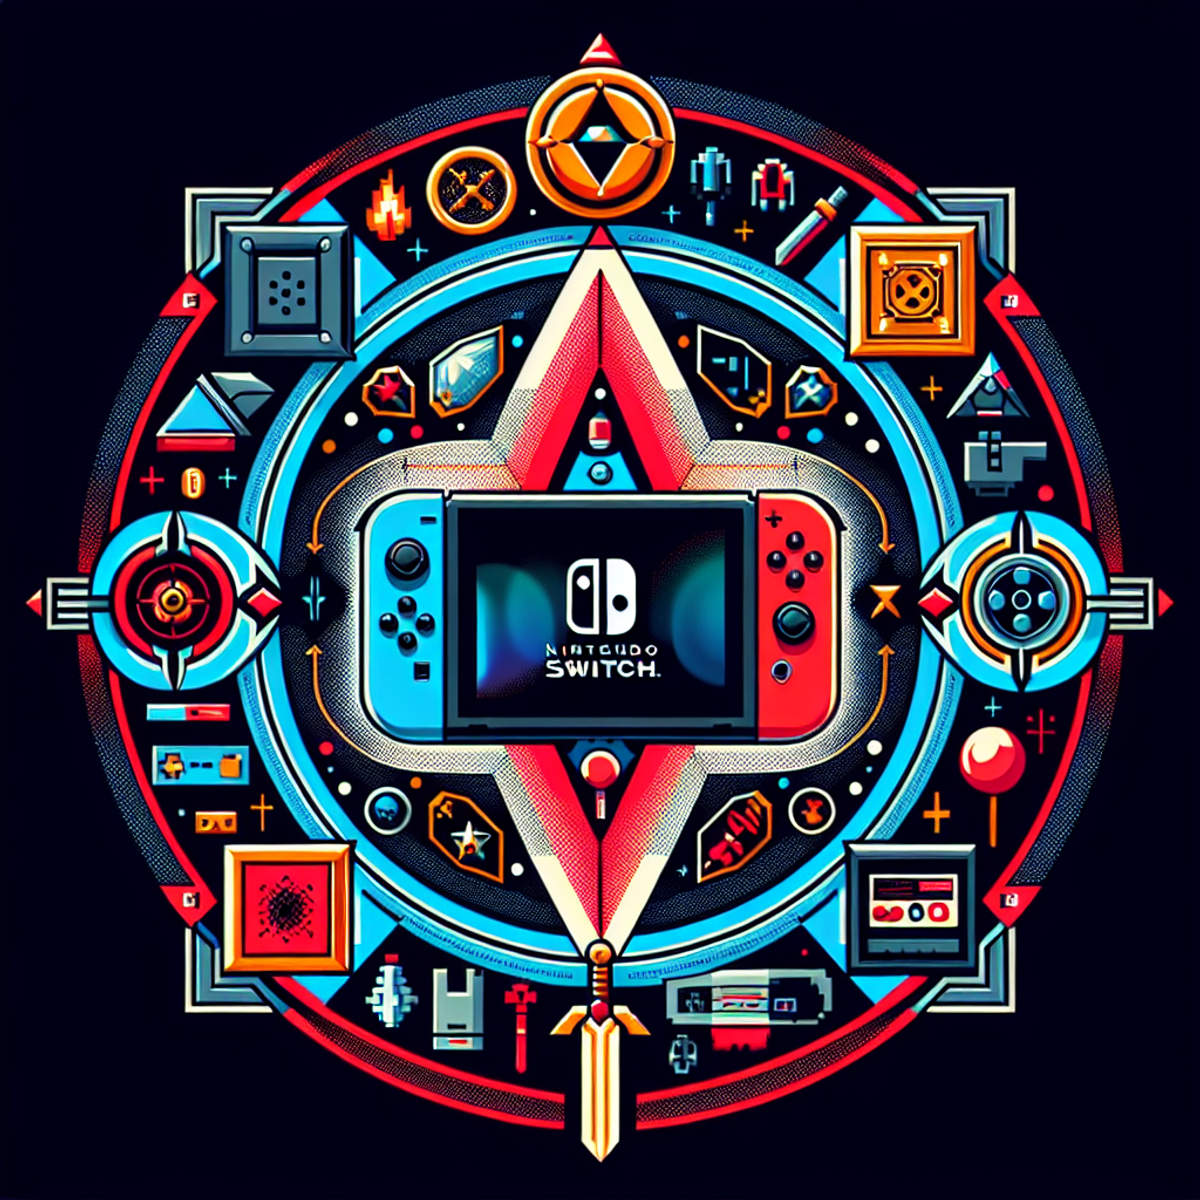 A Nintendo Switch console sits at the center of the image, surrounded by a halo of symbolic items. On one half, there's a shield and a key representing 'Exclusivity,' while the other half displays recognizable motifs from classic Nintendo games in traditional pixel art style.